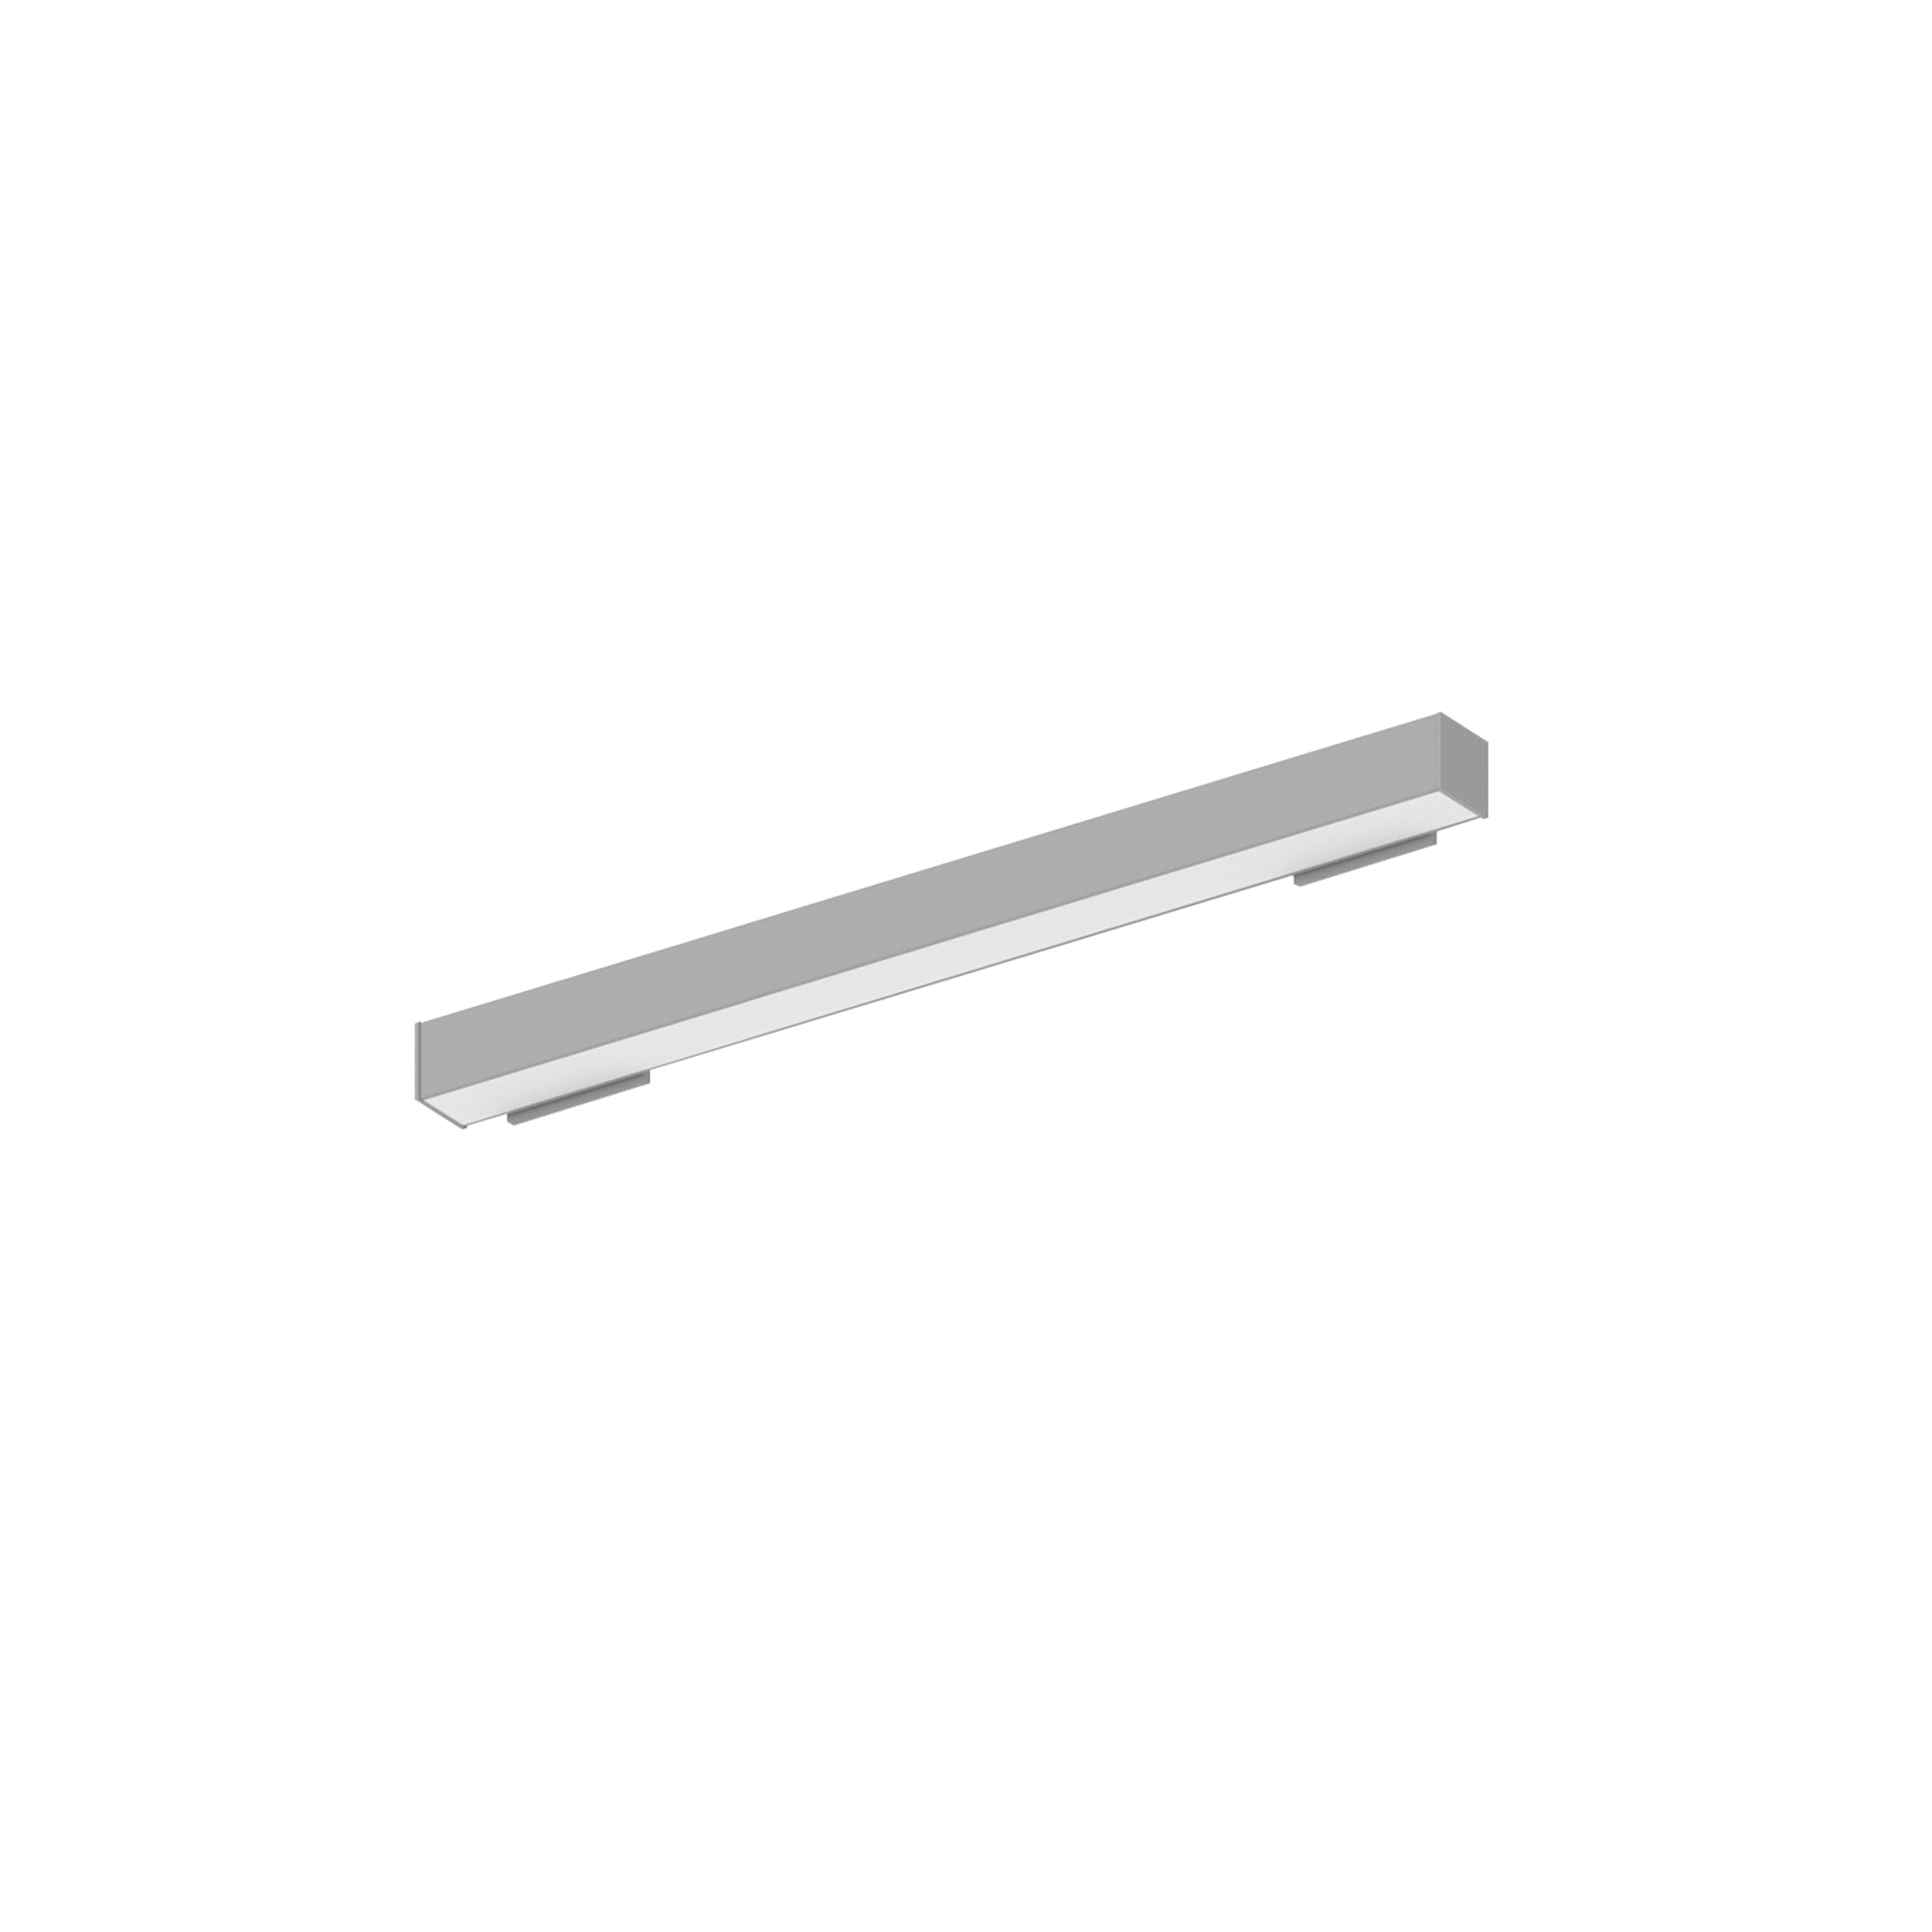 Nora Lighting NWLIN-21040A/L2P-R2 - Linear - 2' L-Line LED Wall Mount Linear, 2100lm / 4000K, 2 Inchx4 Inch Left Plate & 2 Inchx4 Inch Right Plate, Left Power Feed, Aluminum Finish